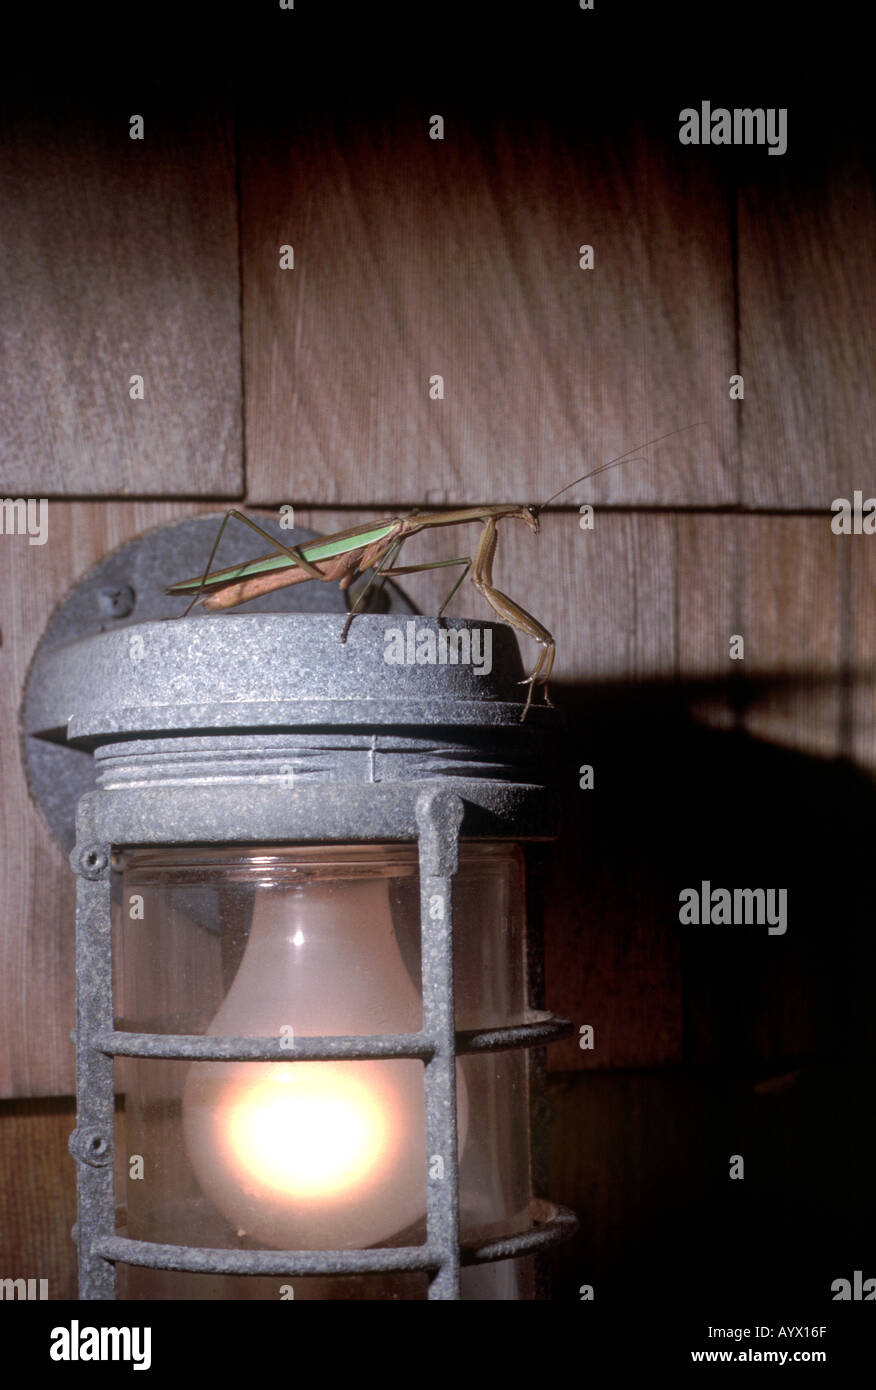 Preying mantis waiting for prey on outdoor lamp. Stock Photo